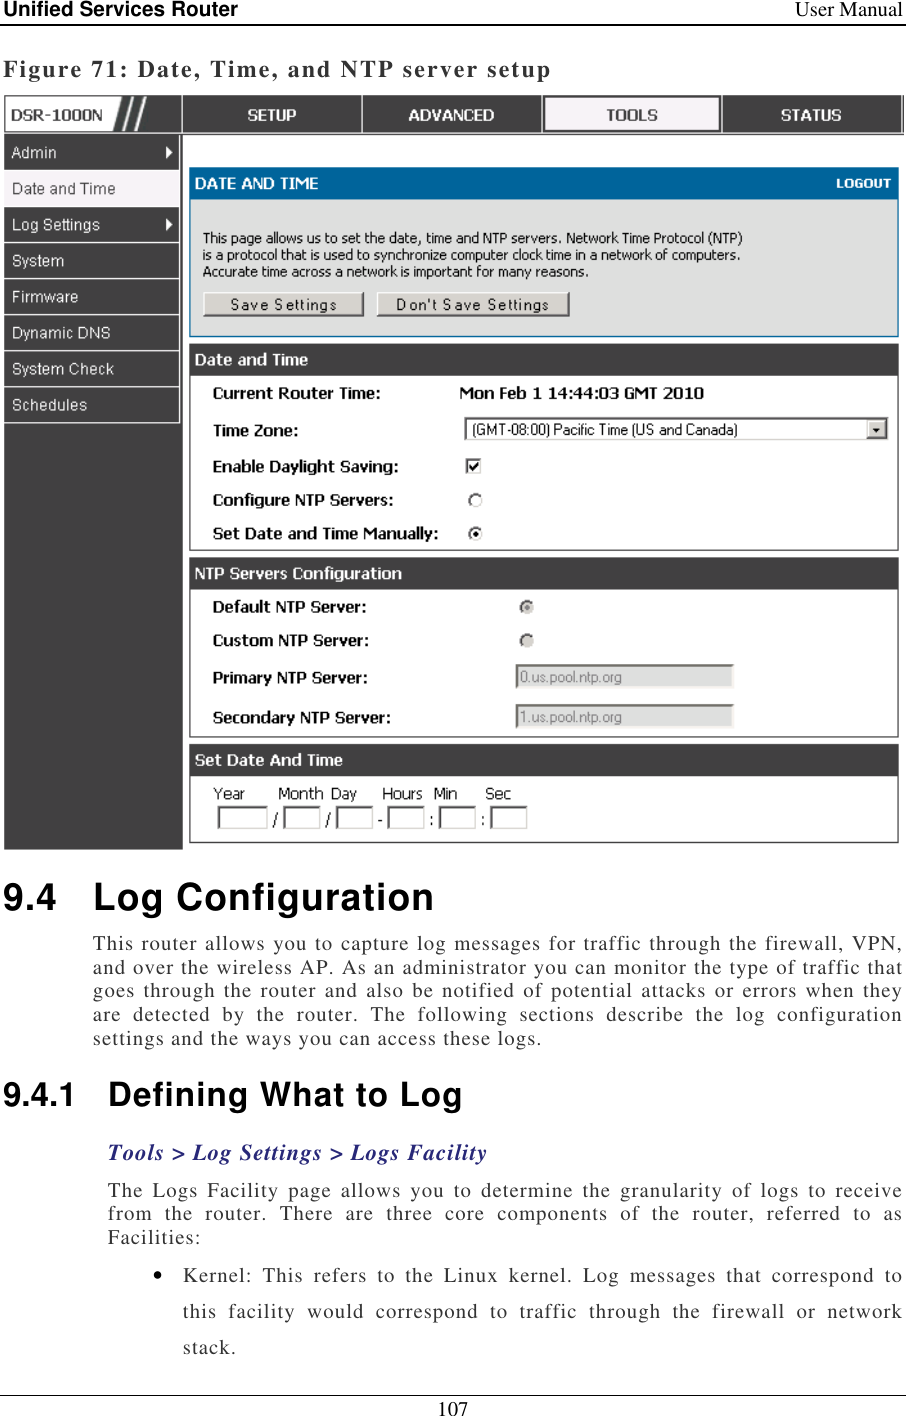 Unified Services Router    User Manual 107  Figure 71: Date, Time, and NTP server setup  9.4  Log Configuration This router allows you to capture log messages for traffic through the firewall, VPN, and over the wireless AP. As an administrator you can monitor the type of traffic that goes through  the router  and also  be  notified  of  potential attacks  or  errors  when  they are  detected  by  the  router.  The  following  sections  describe  the  log  configuration settings and the ways you can access these logs.  9.4.1  Defining What to Log Tools &gt; Log Settings &gt; Logs Facility The  Logs  Facility  page  allows  you  to  determine  the  granularity  of  logs  to  receive from  the  router.  There  are  three  core  components  of  the  router,  referred  to  as Facilities: • Kernel:  This  refers  to  the  Linux  kernel.  Log  messages  that  correspond  to this  facility  would  correspond  to  traffic  through  the  firewall  or  network stack. 